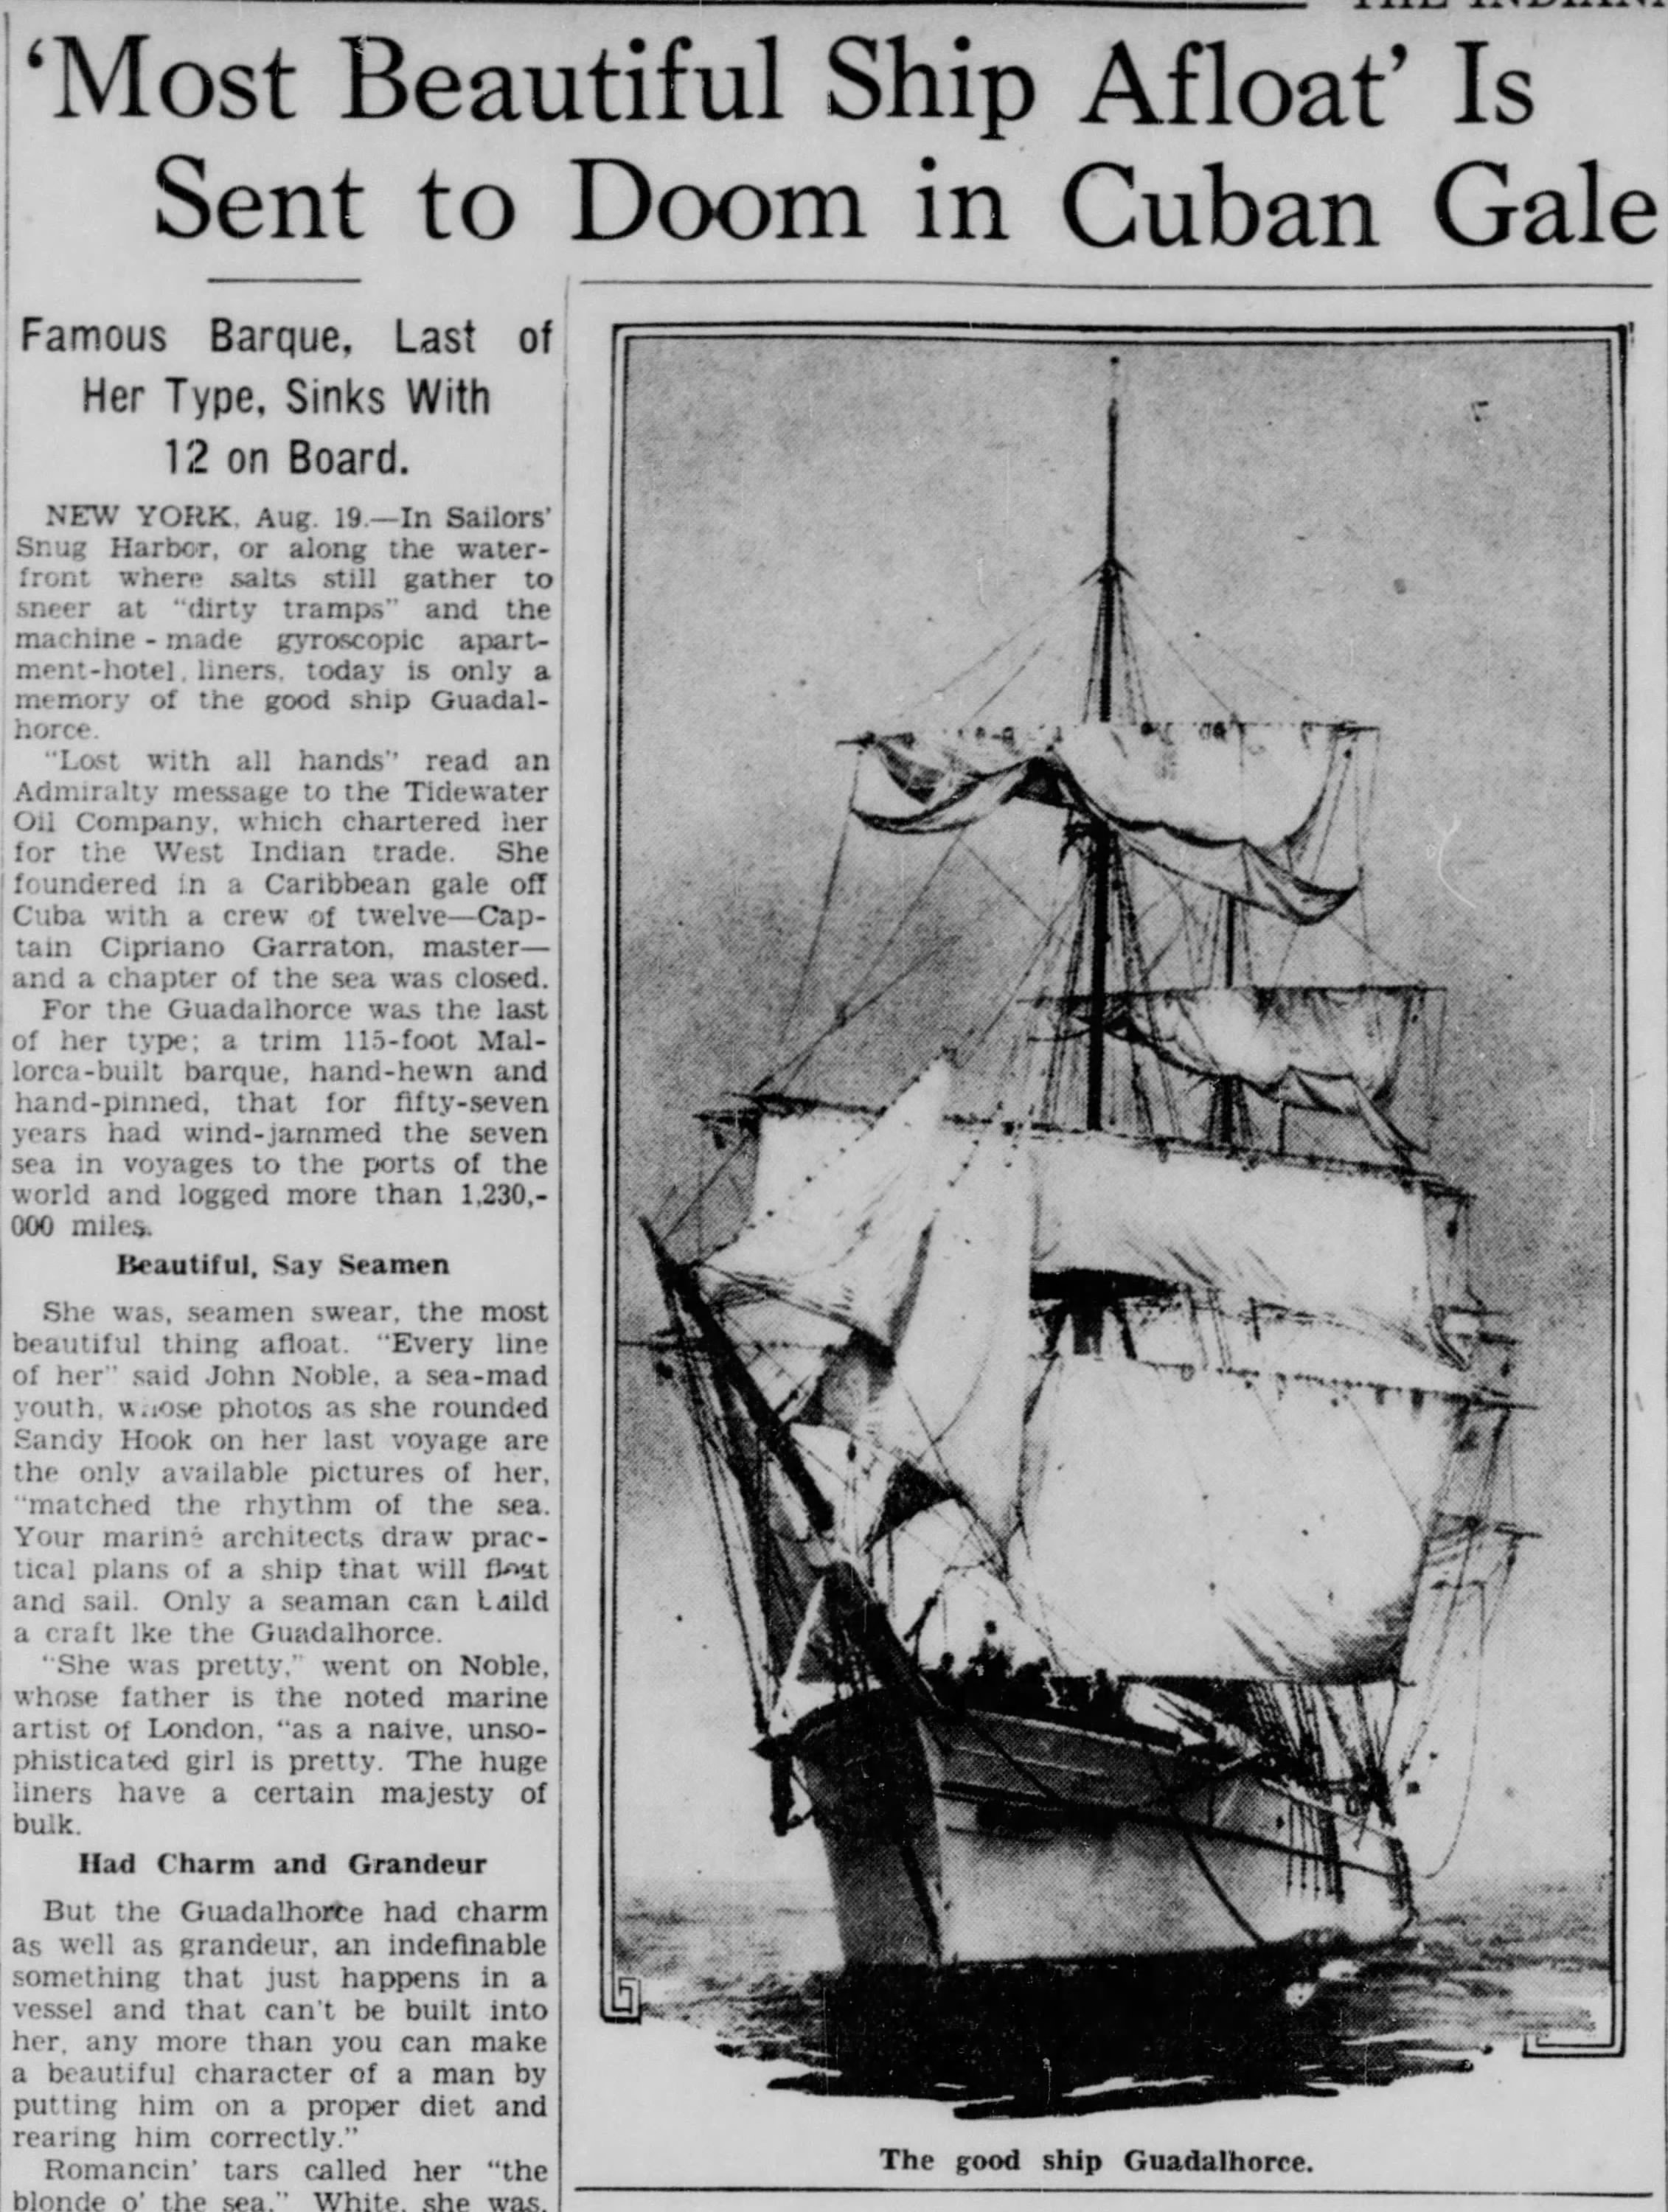 ‘Most Beautiful Ship Afloat’ is Sent to Doom in Cuban Gale, Guadalhorce, The Indianapolis Times, Indianapolis, Indiana, Saturday, August 19, 1933. Courtesy of Newspapers.com.